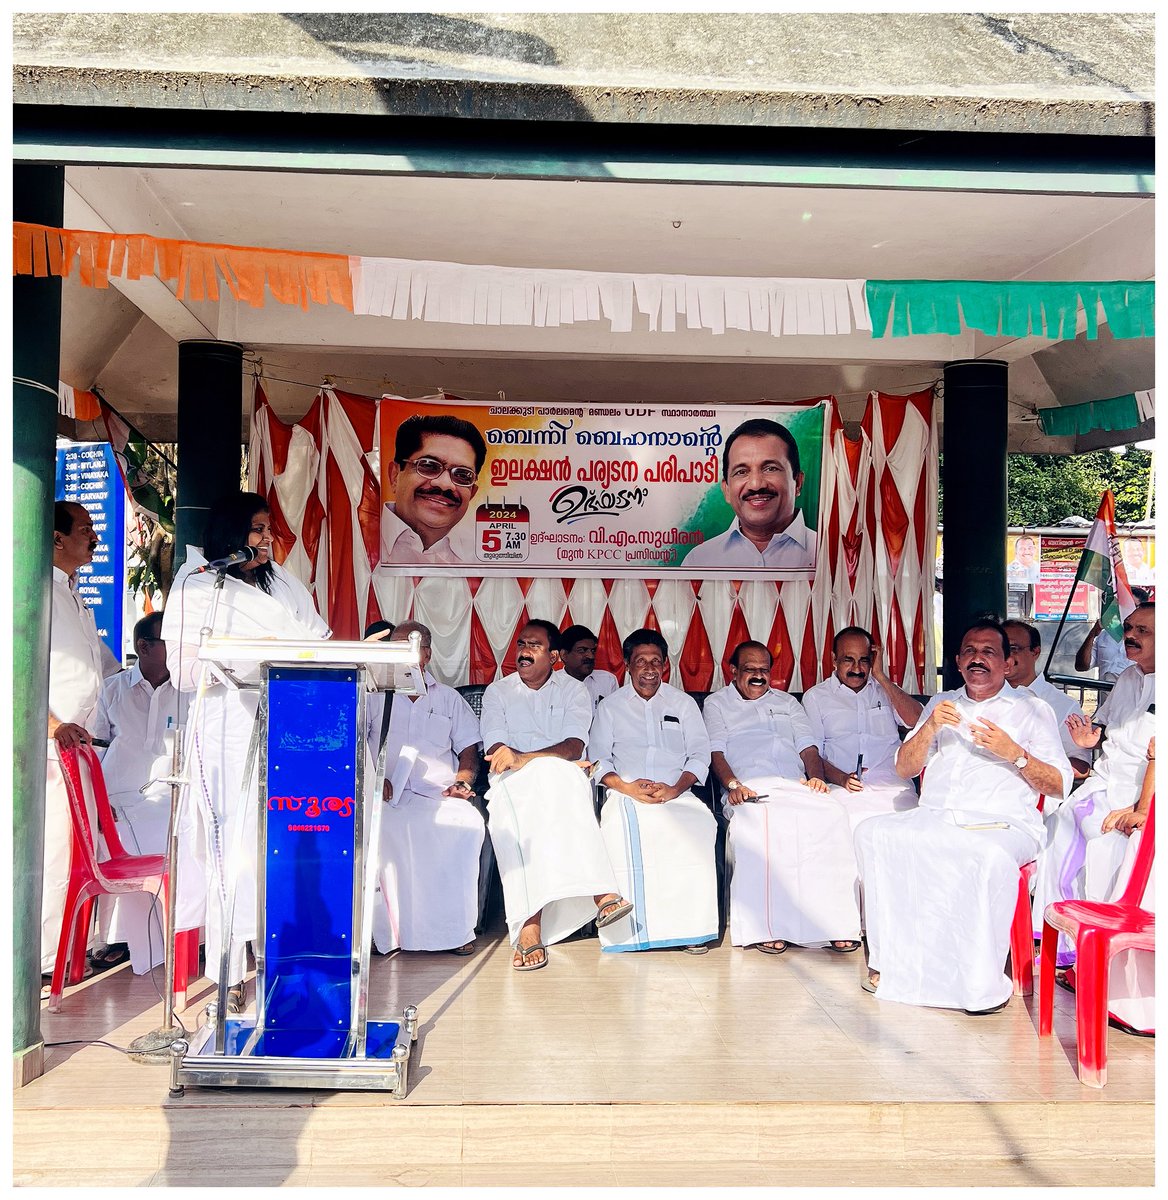 UDF Chalakudy candidate Shri Benny Behanan's candidate tour started today from Kuruppampady. Inauguration was done by Senior Congress leader Shri. VM Sudheeran.